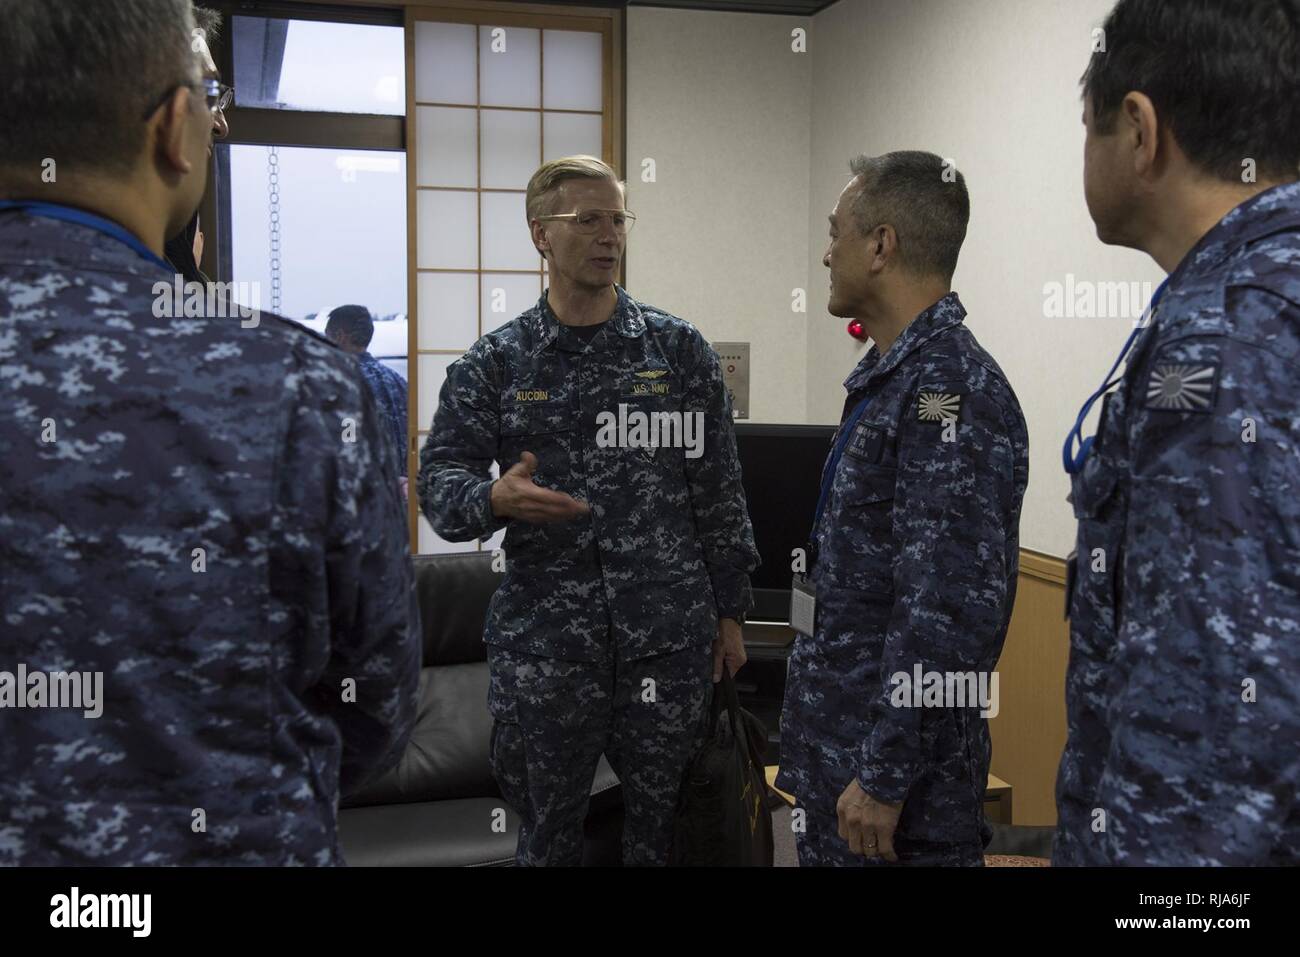 ATSUGI, Japan (Nov.02, 2016) Vice Adm. Joseph P. Aucoin, Commander, U.S. 7th Fleet, speaks with Vice Adm. Yasuhiro Shigeoka, Commander-in-Chief, Self Defense Fleet, Japan Maritime Self-Defense Force, during a visit to Naval Air Facility Atsugi during exercise Keen Sword 2017 (KS 17). KS 17 is a joint, bilateral field-training exercise involving U.S. military and Japan Self-Defense Force personnel designed to increase the combat readiness and interoperability of the Japan-U.S. alliance. Stock Photo